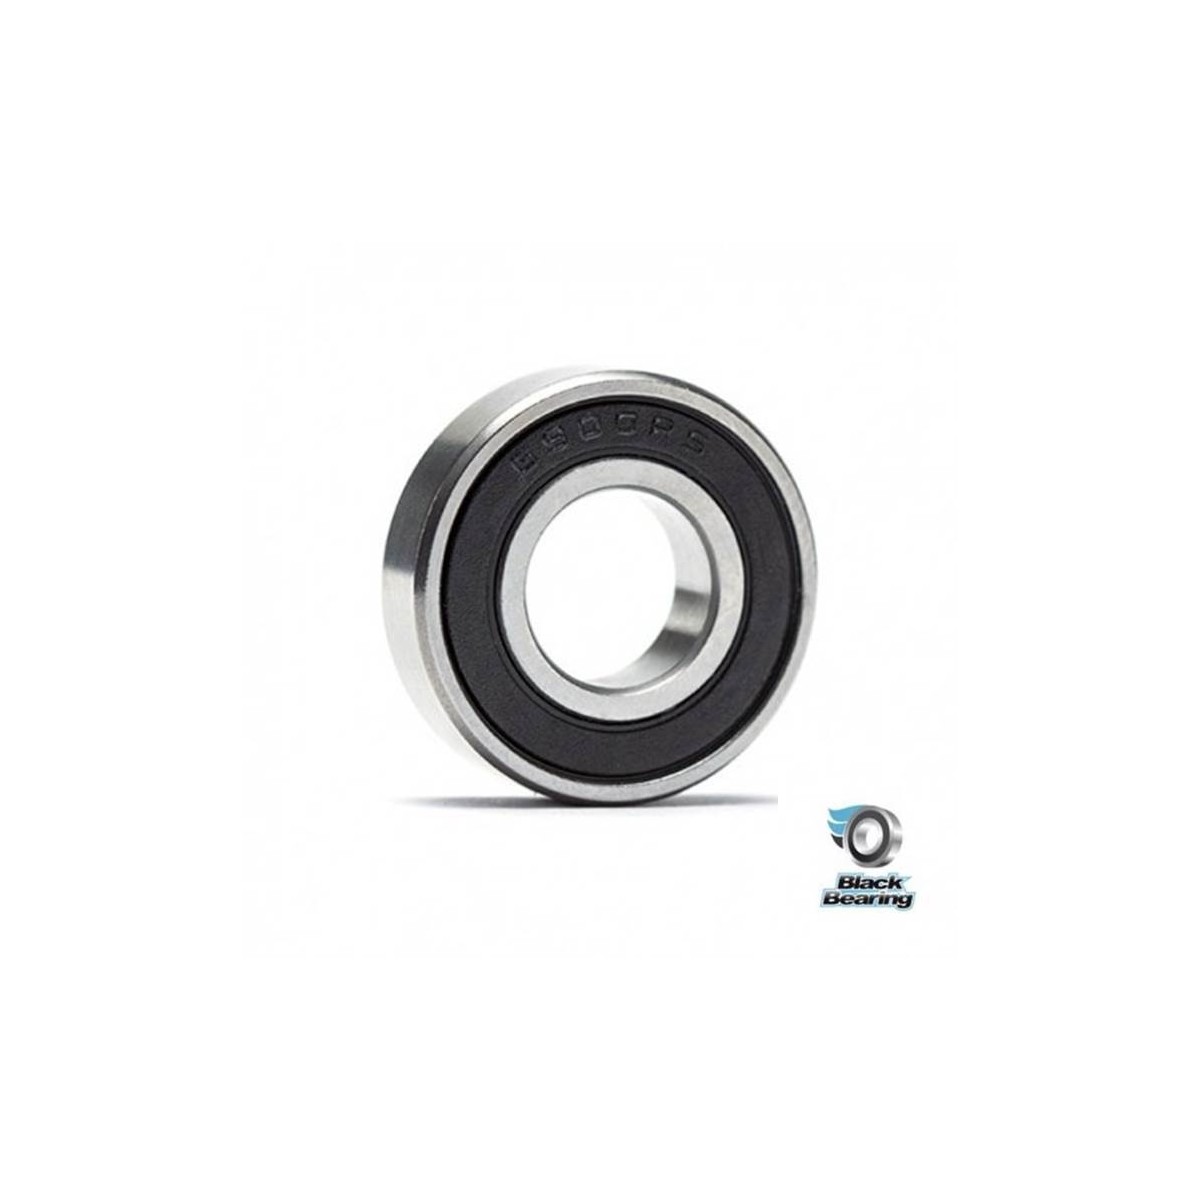 BLACK BEARING B3 roulement 10x22x6 roulement 6900-RS bearing - NEUF